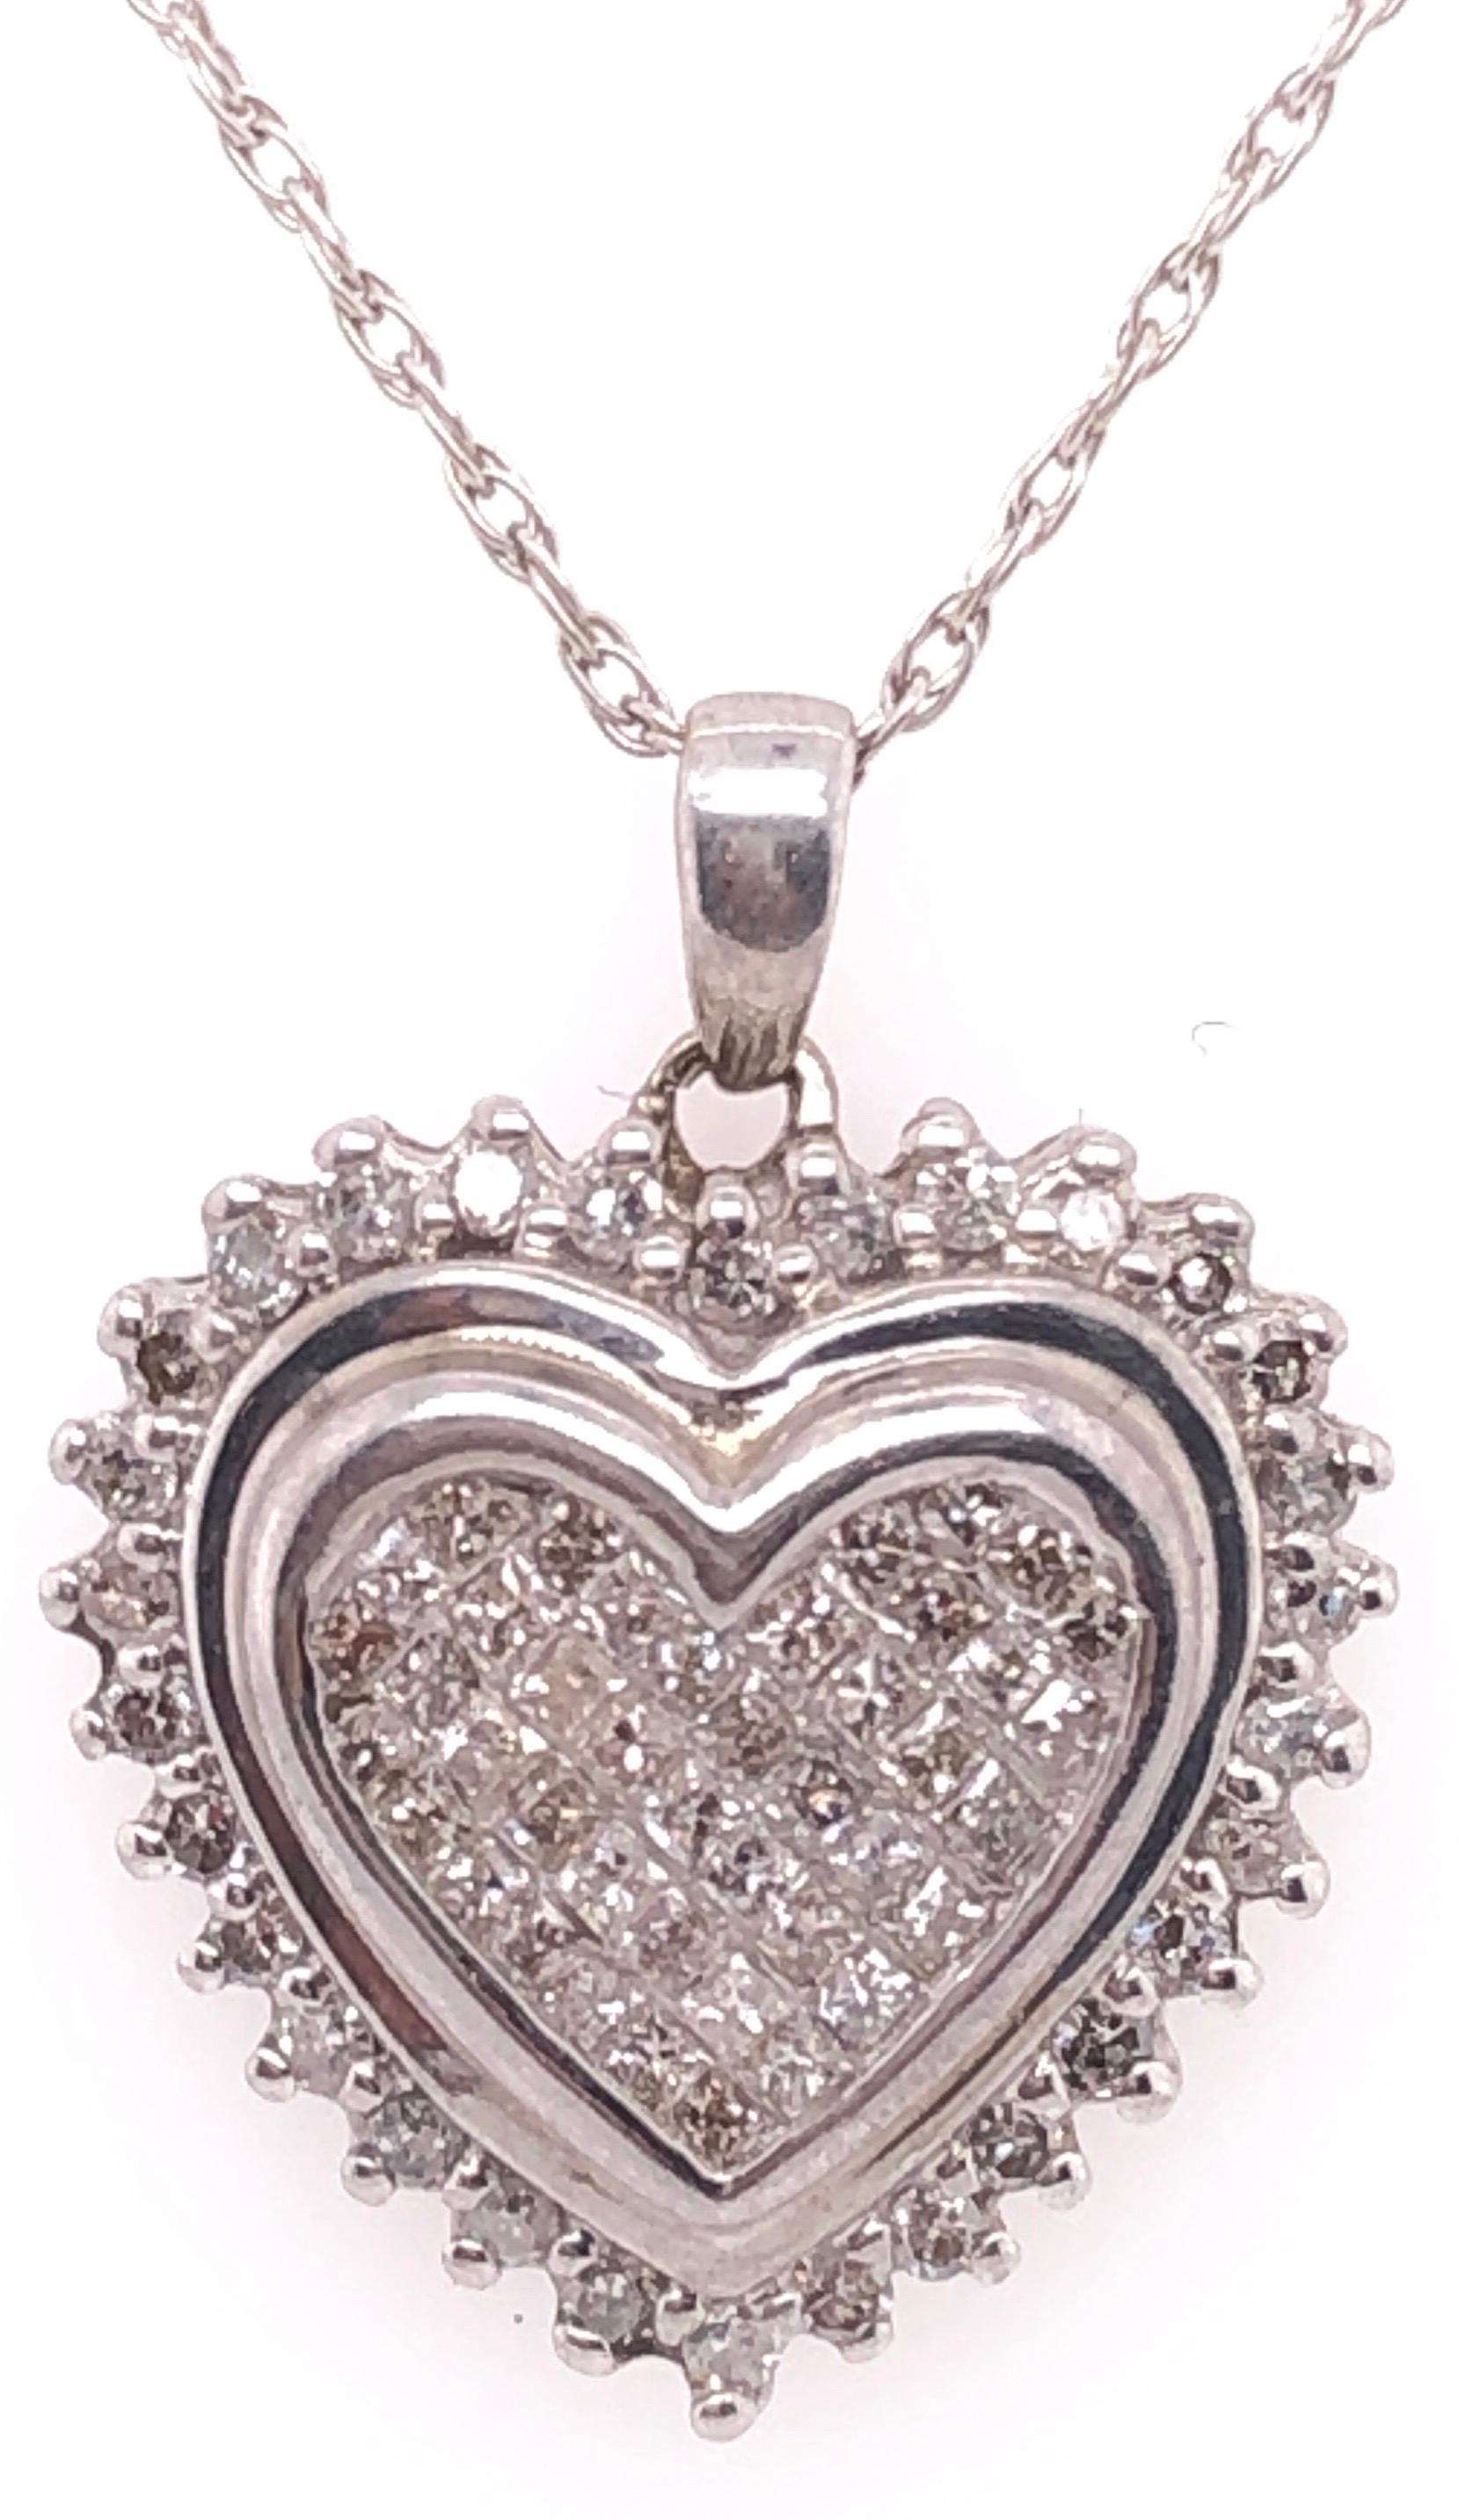 14 Karat White Gold 16 Inch Heart Pendant Necklace with Round Diamonds.
1.00 total diamond weight.
2.92 grams total weight.